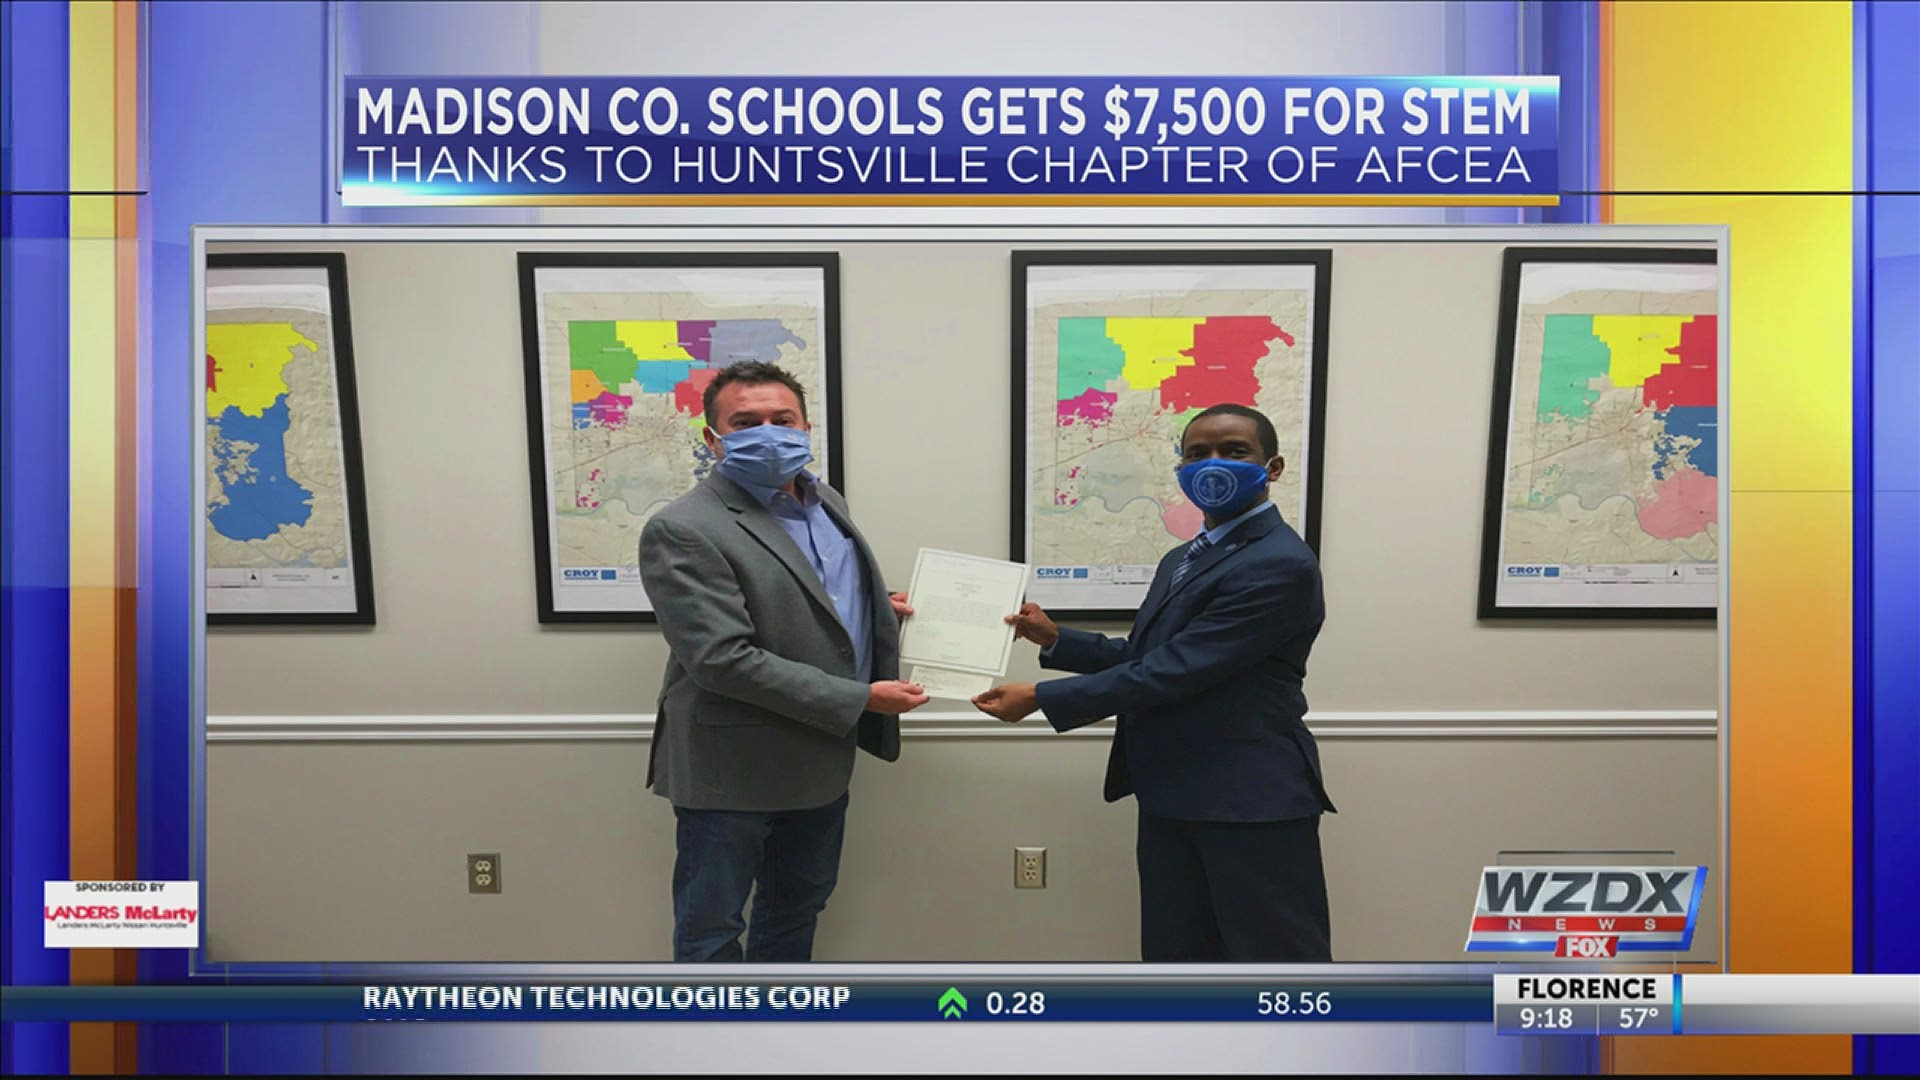 Madison County Schools has an extra $7,500 for stem activities